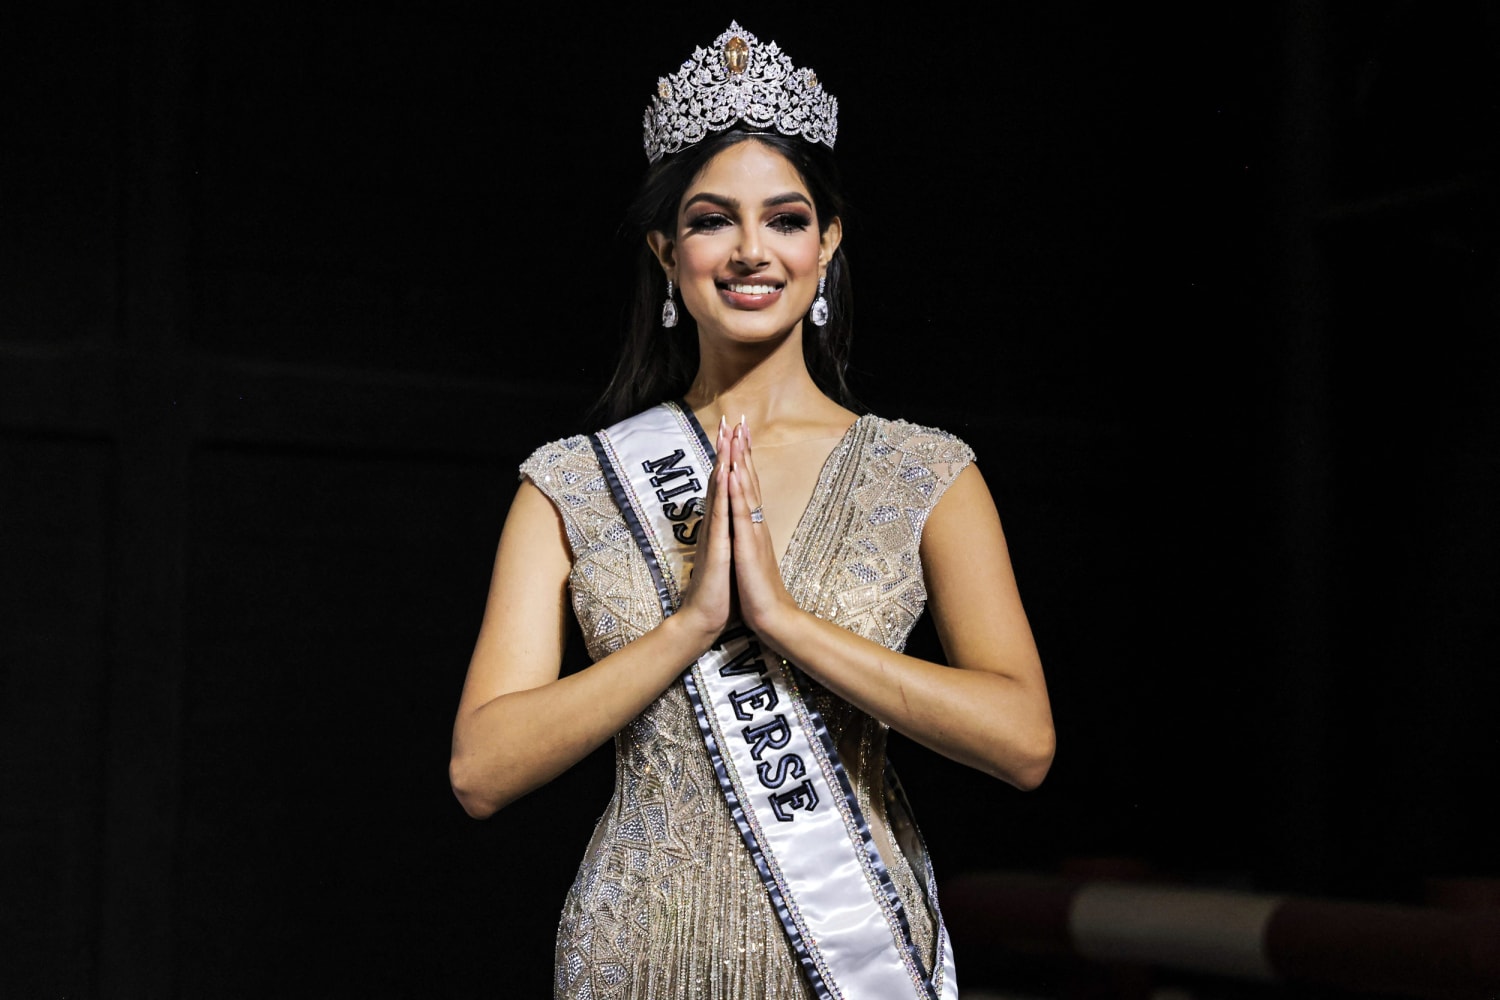 Decades of Miss Universe pageants reveal colorism in Indian beauty standards